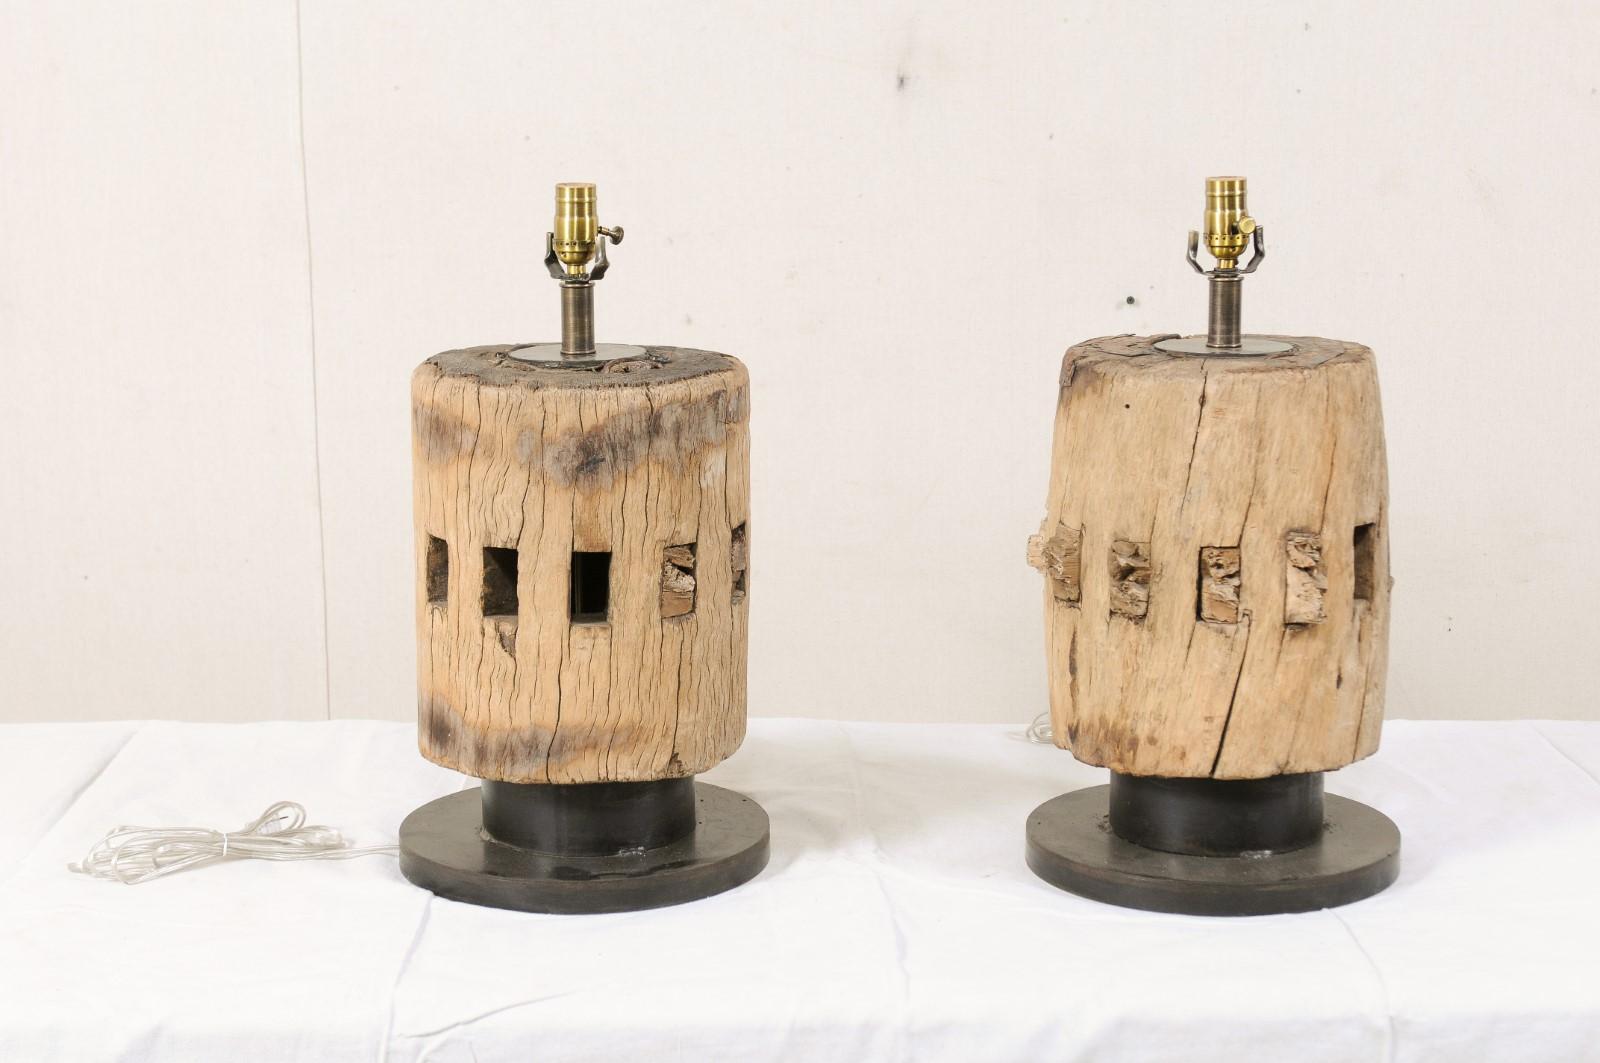 A pair of table lamps with French wood cog column bodies from the early 19th century. This pair of table lamps have been custom fashioned from a cut section of a 19th century wooden cog (or gear) from France, with nicely notched cut-outs about their